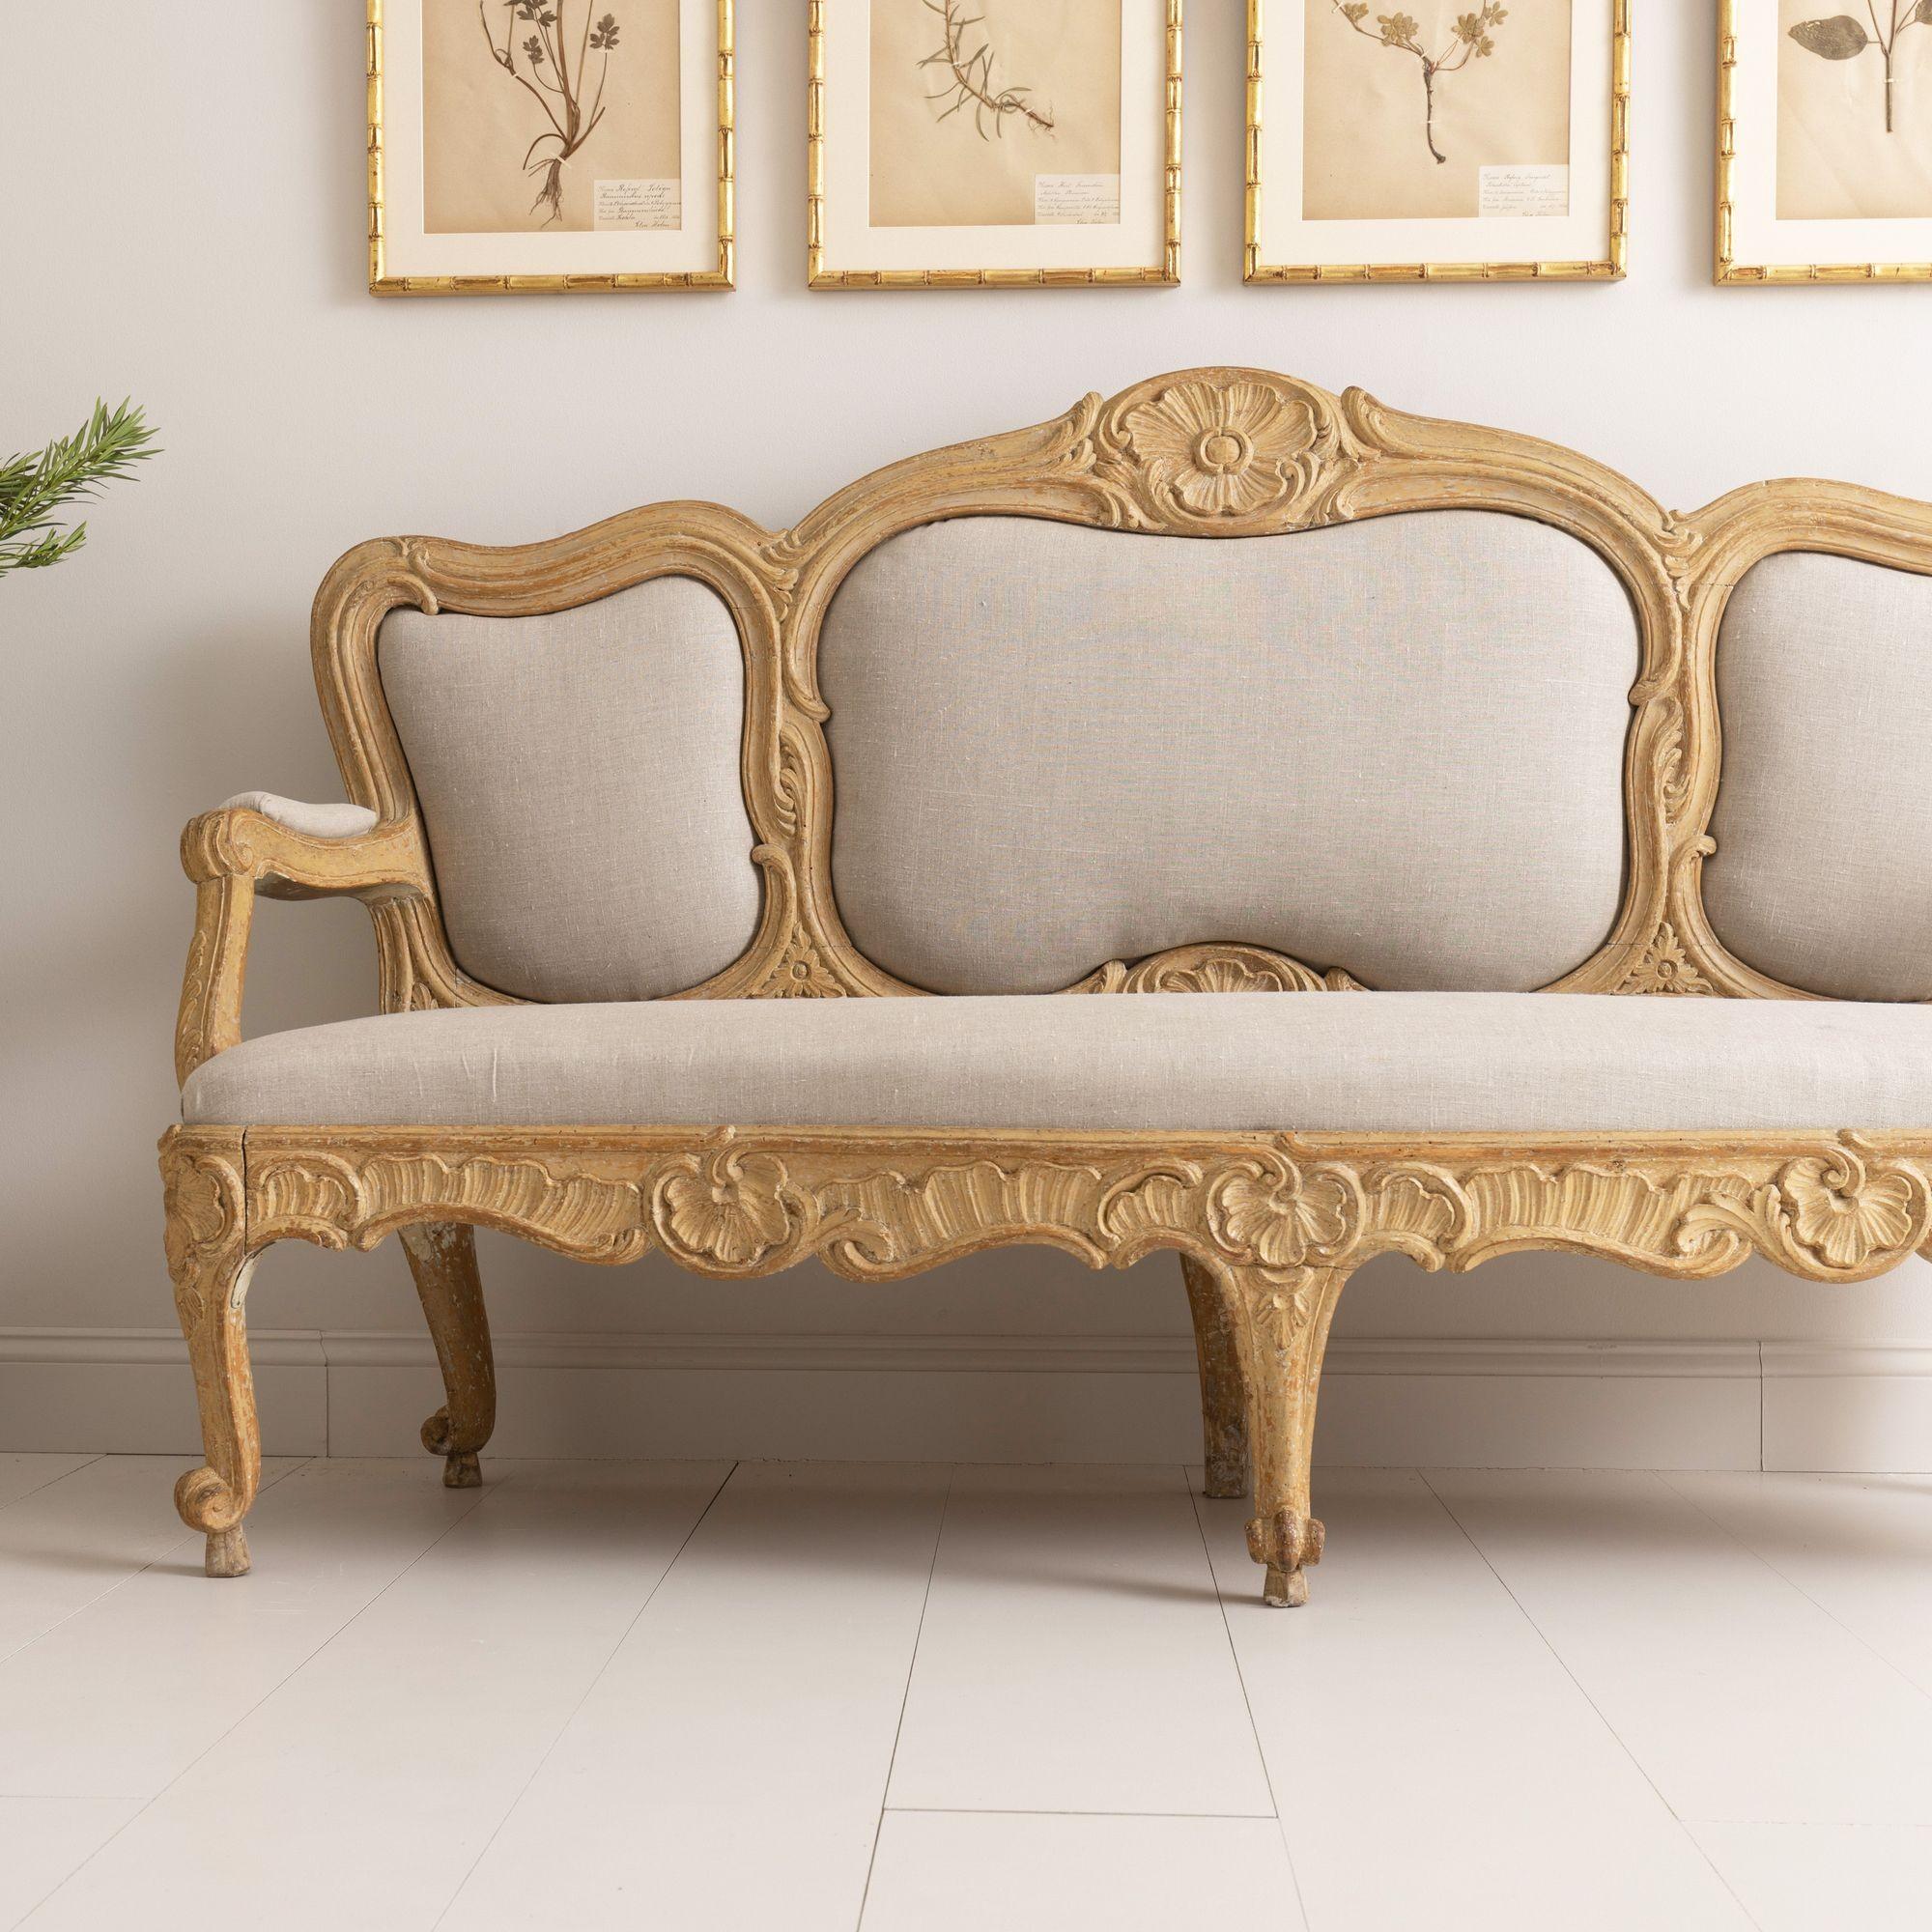 Linen 18th C. Swedish Rococo Sofa Bench in Original Paint from Stockholm